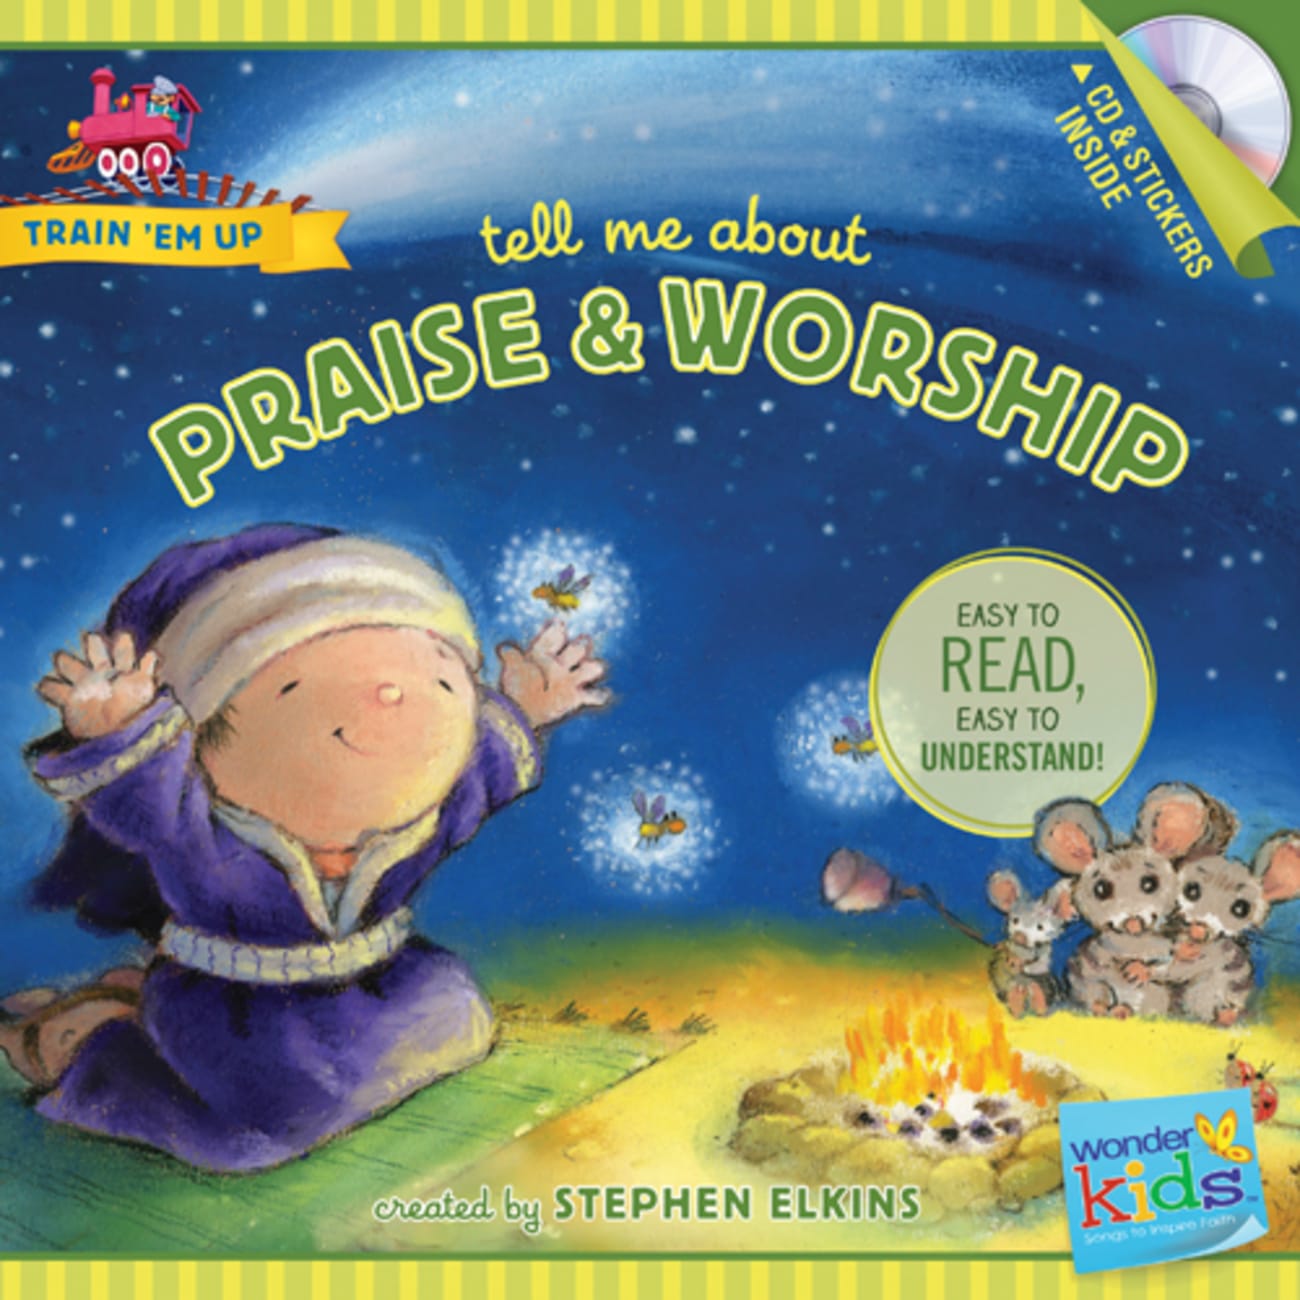 Tell Me About Praise and Worship (Includes CD & Stickers) (Wonder Kids: Train 'Em Up Series) Paperback